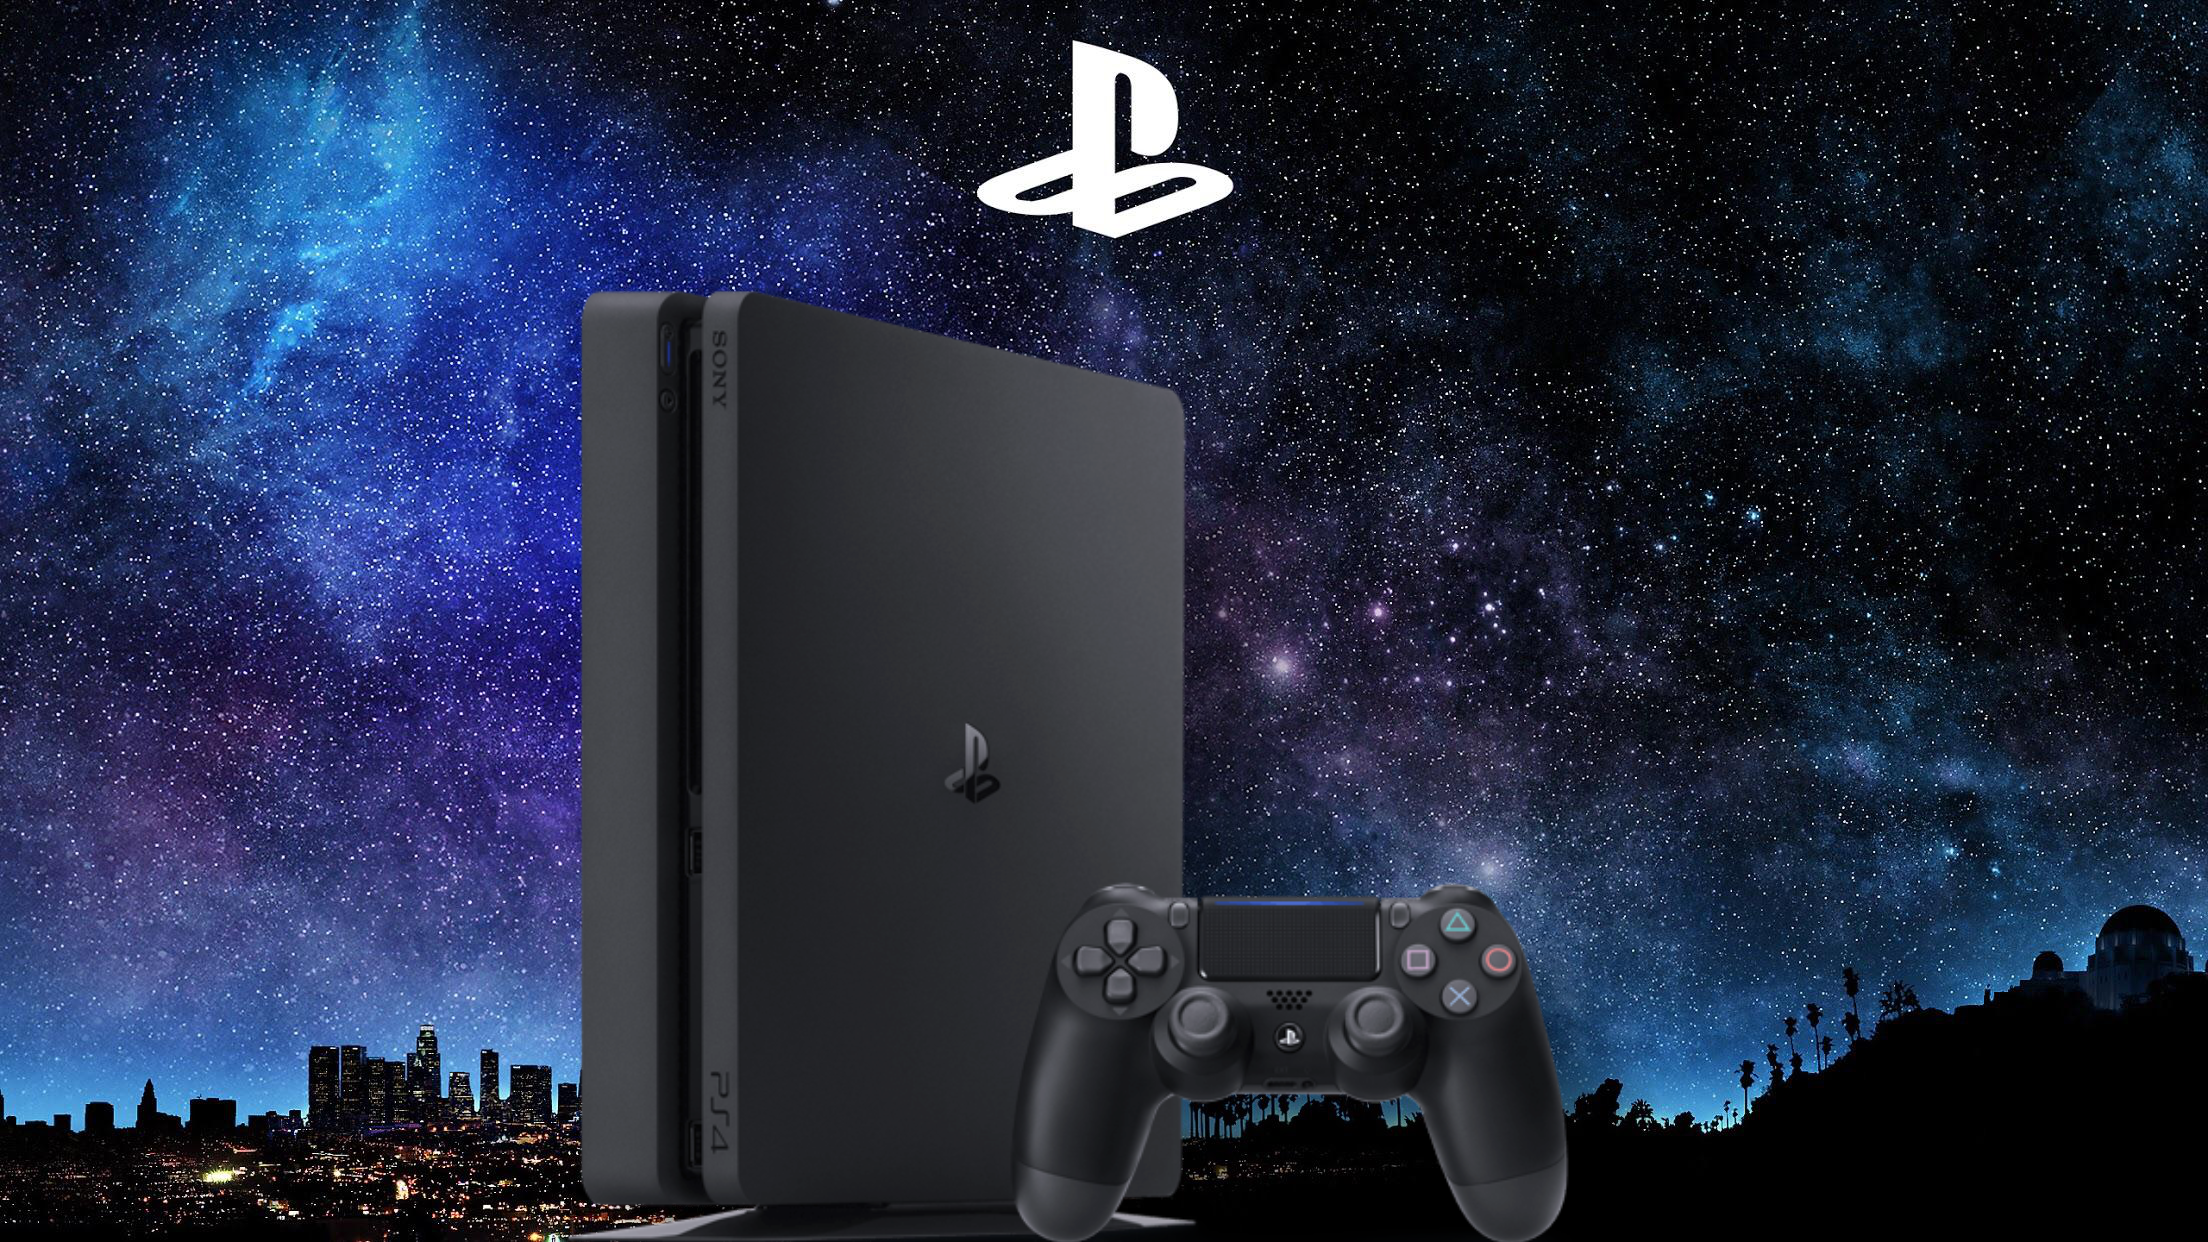 Sony reportedly originally planned to discontinue the PS4 in 2021